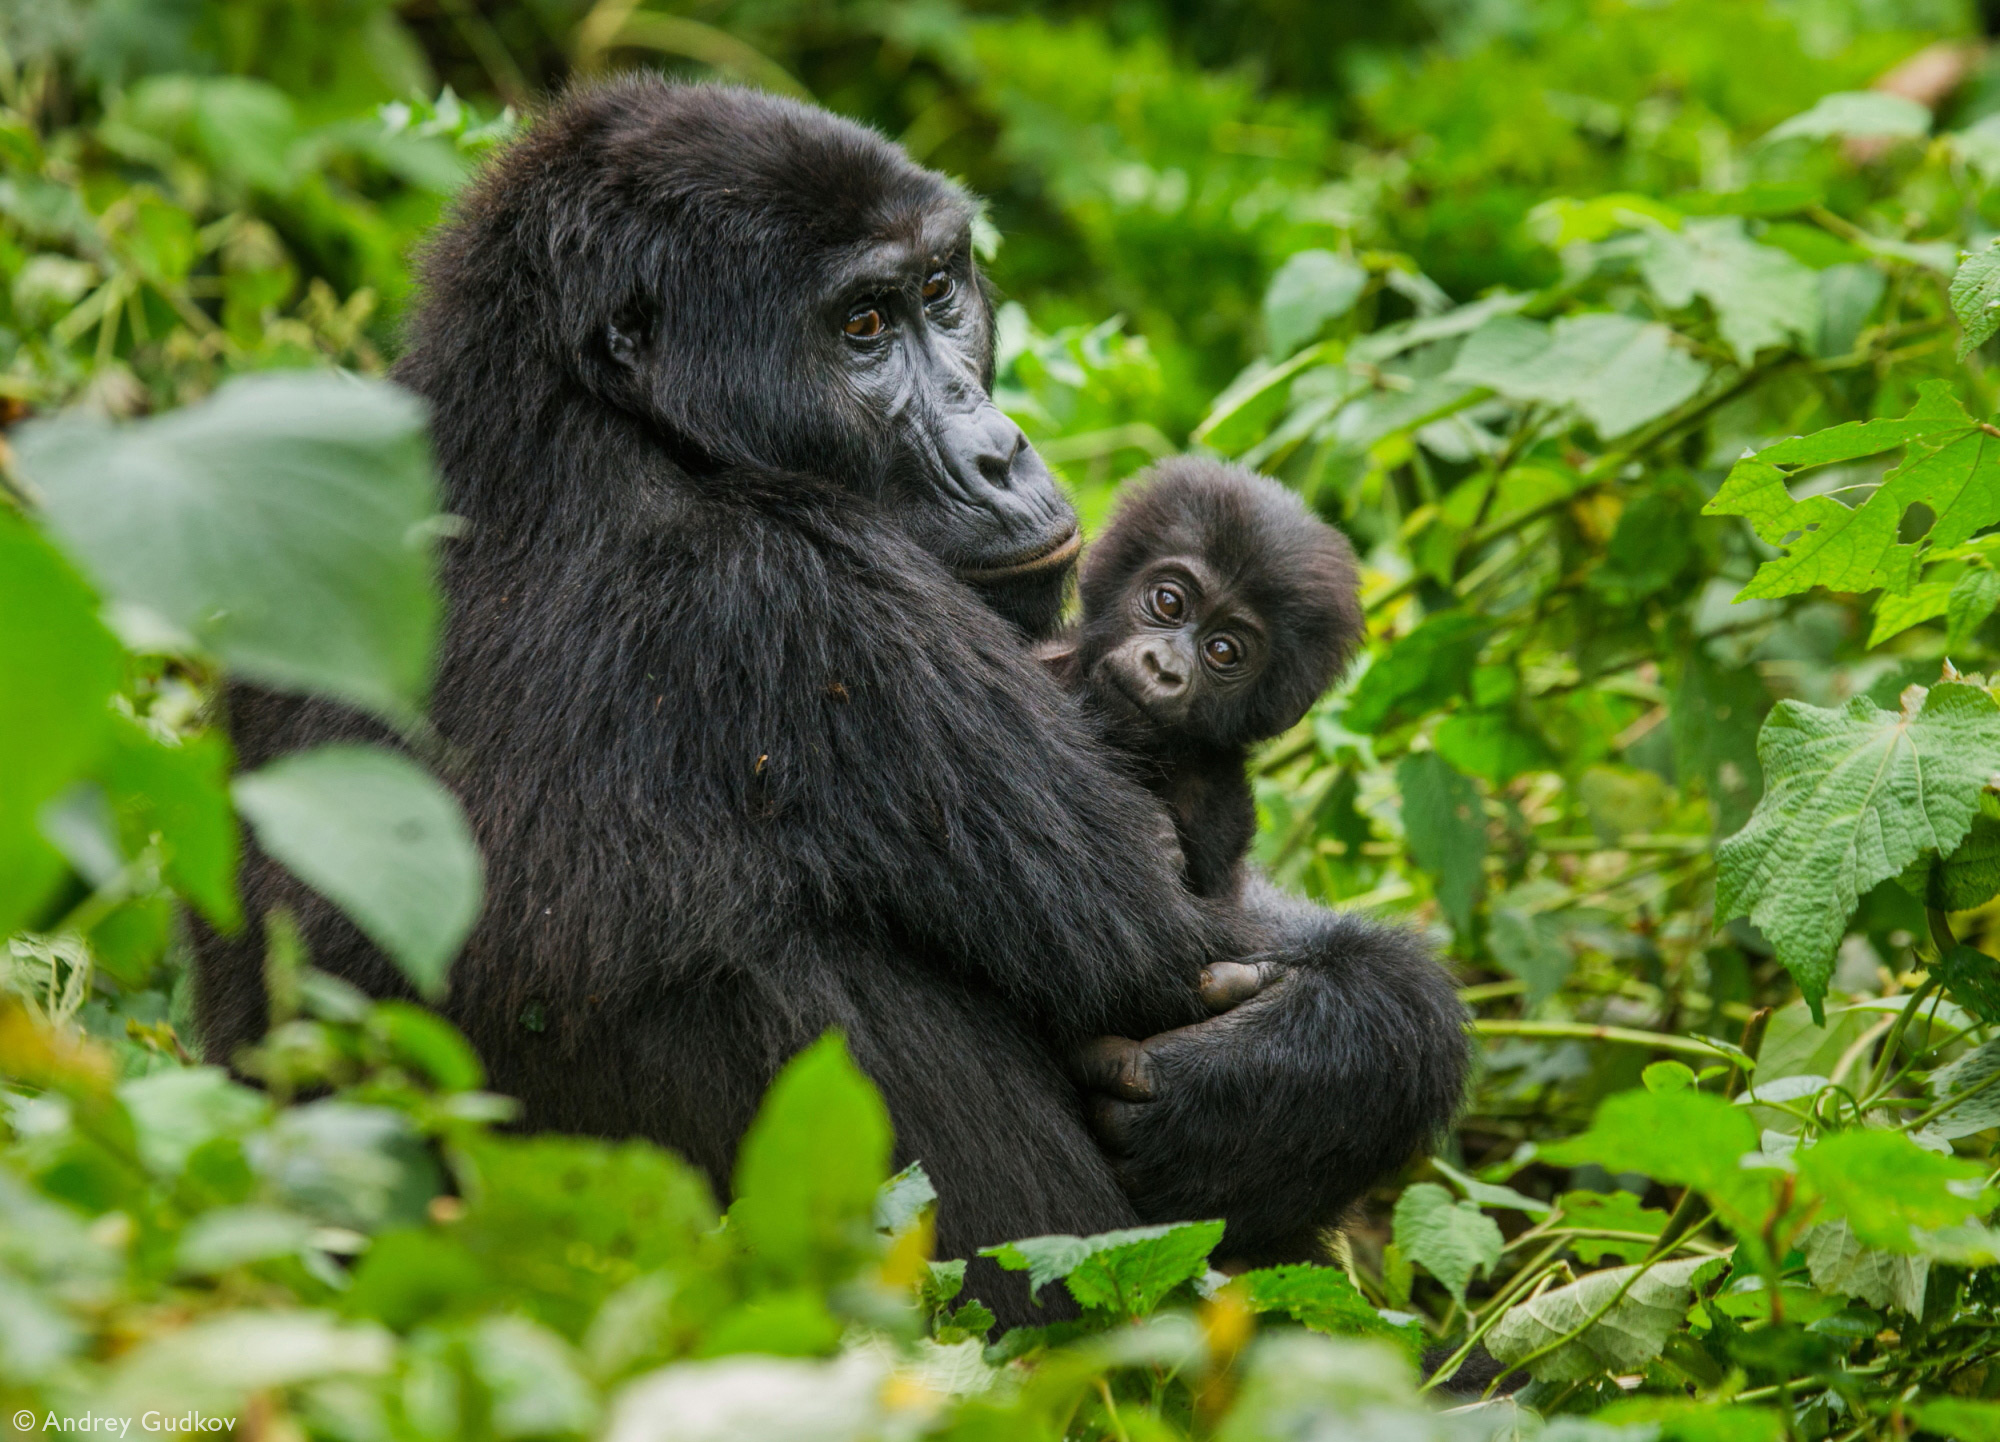 A mother mountain gorilla with her baby in Bwindi Impenetrable National Park, Uganda © Andrey Gudkov